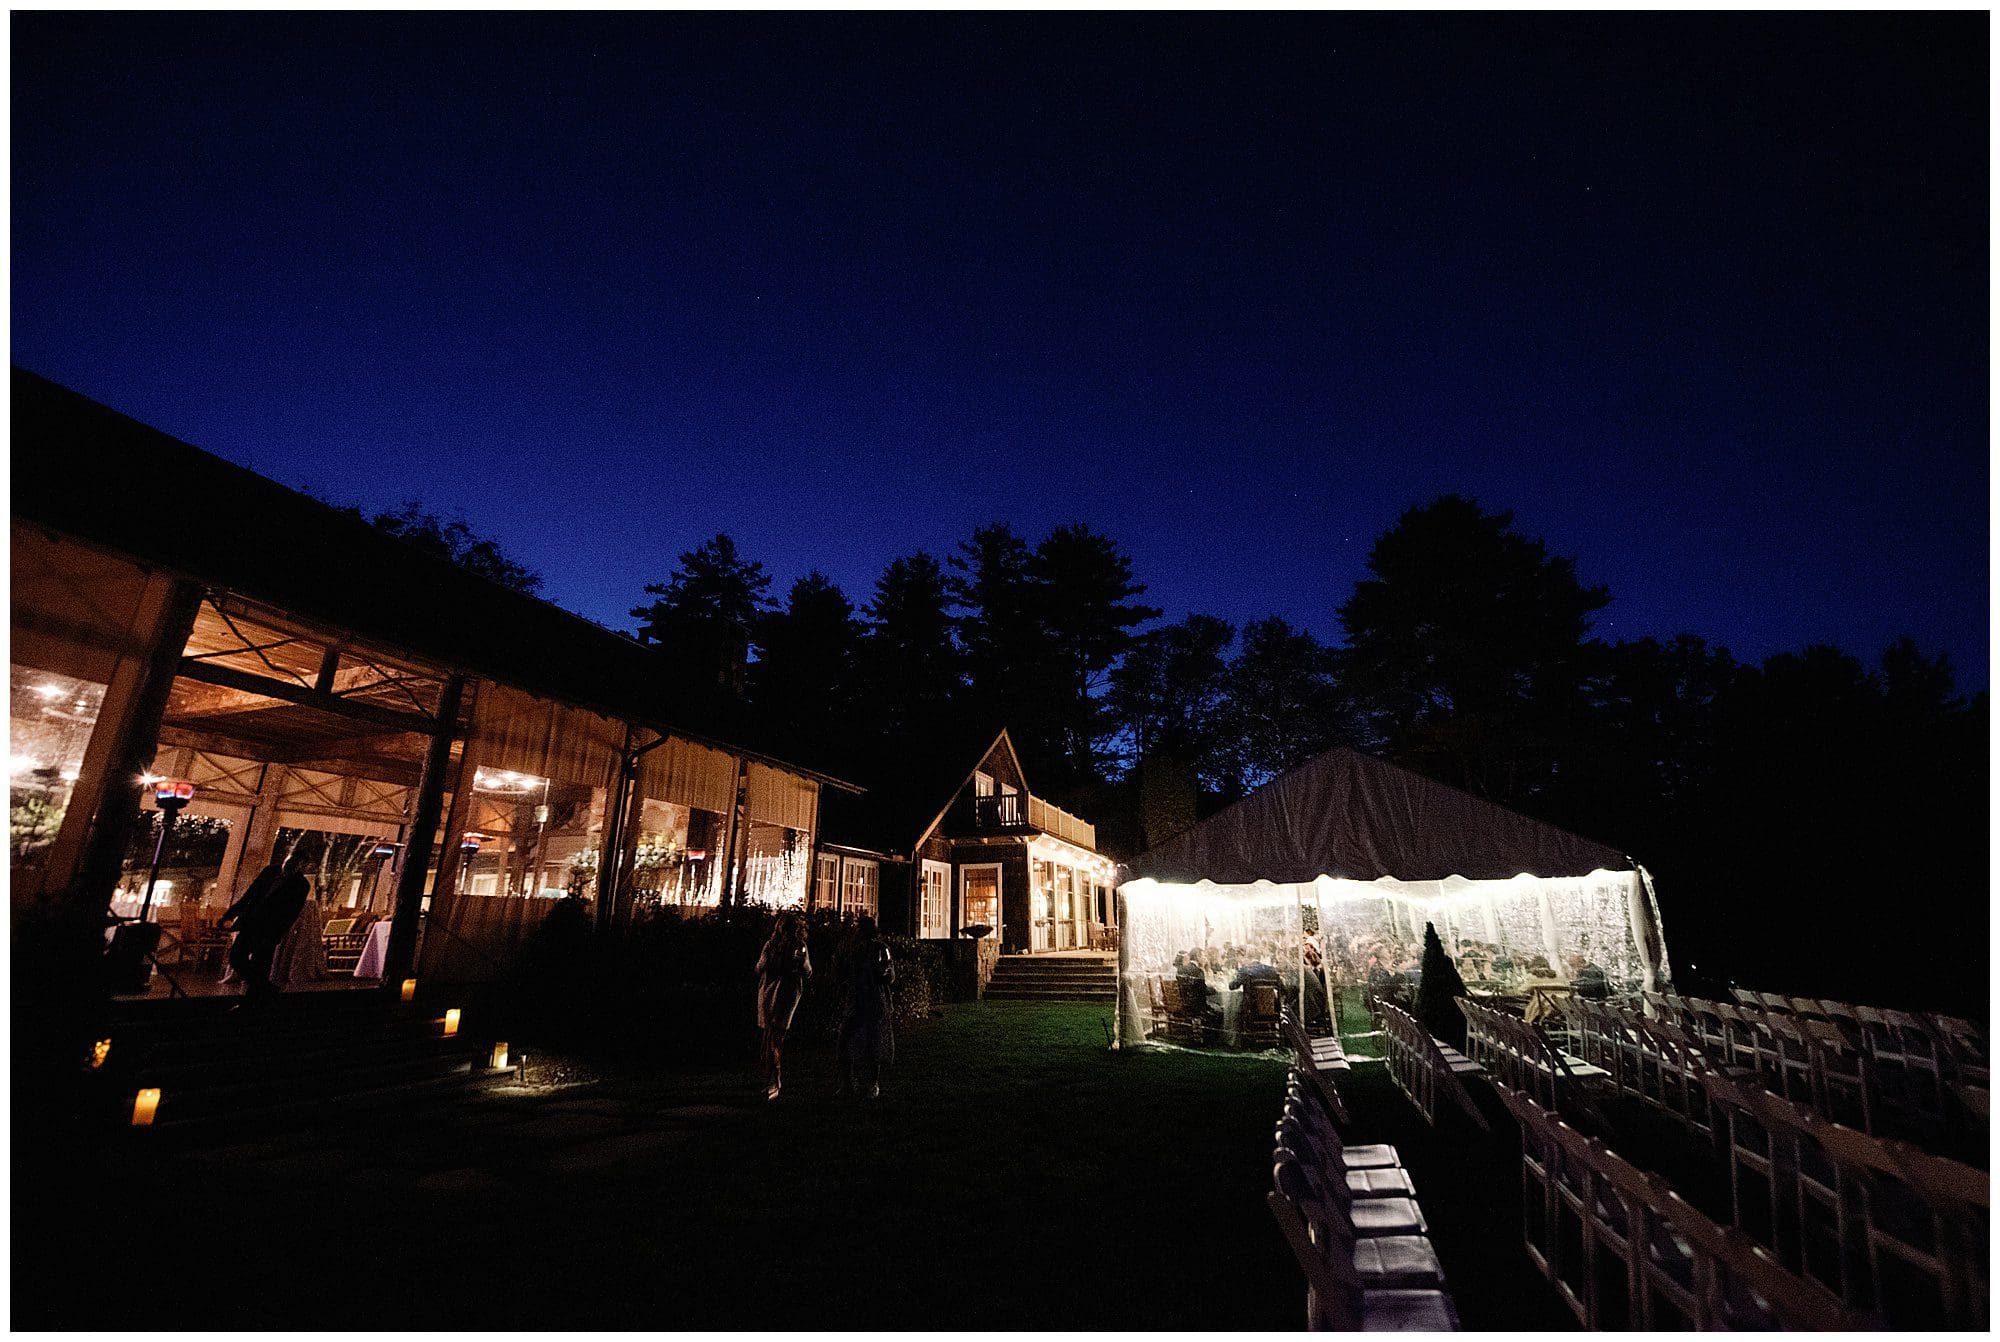 An outdoor wedding at night with a tent in the background.